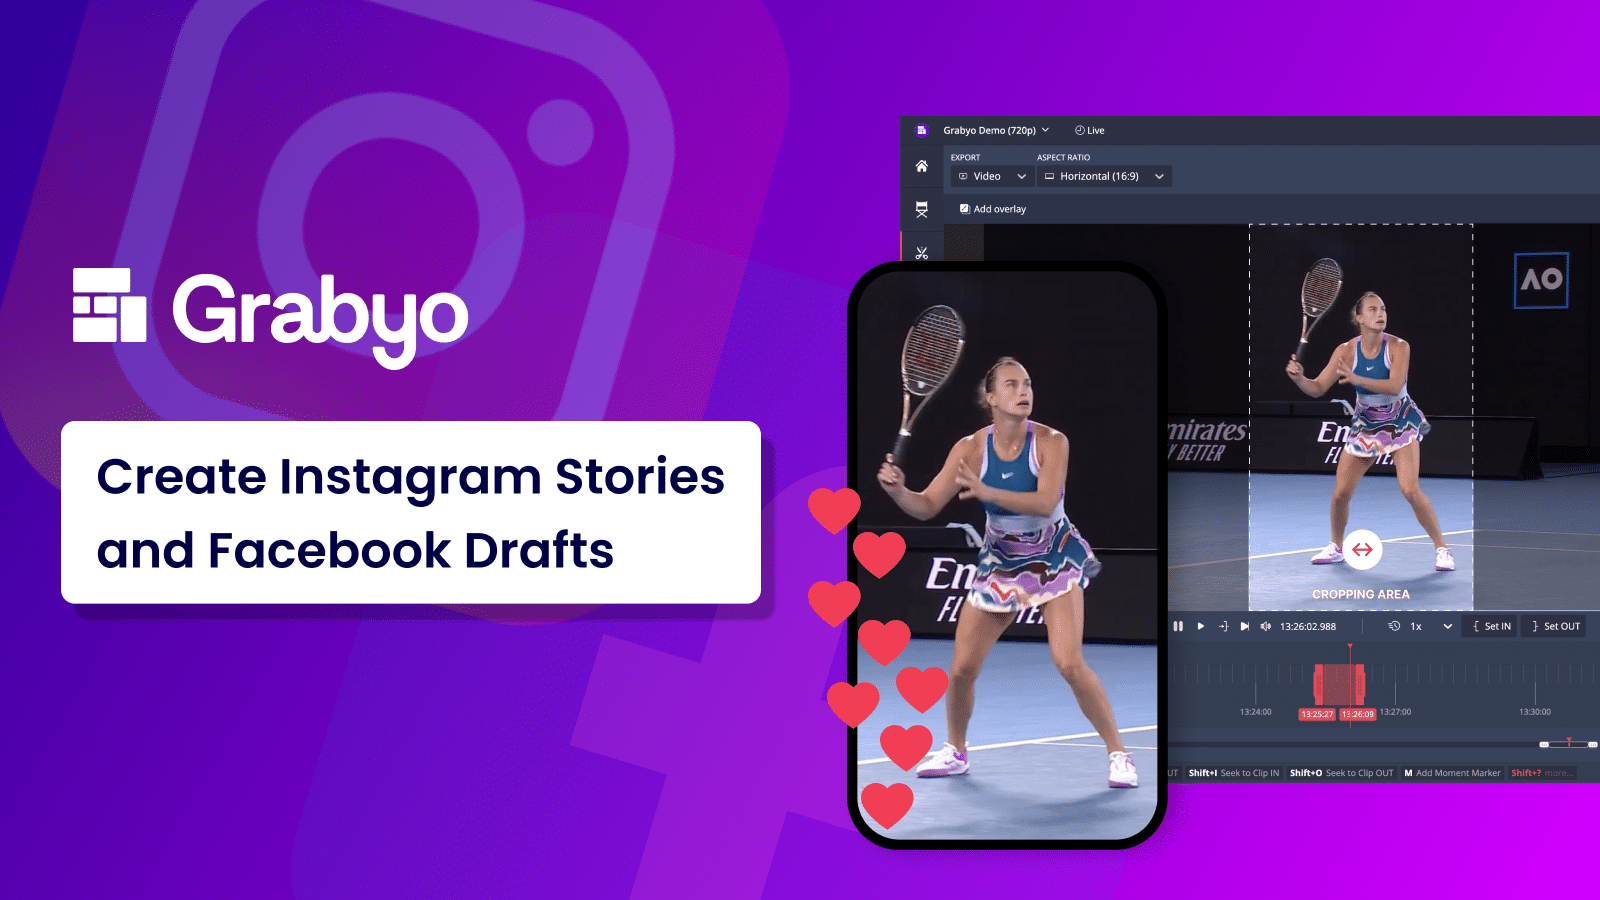 Grabyo adds Instagram Stories and Facebook Drafts to social integrations